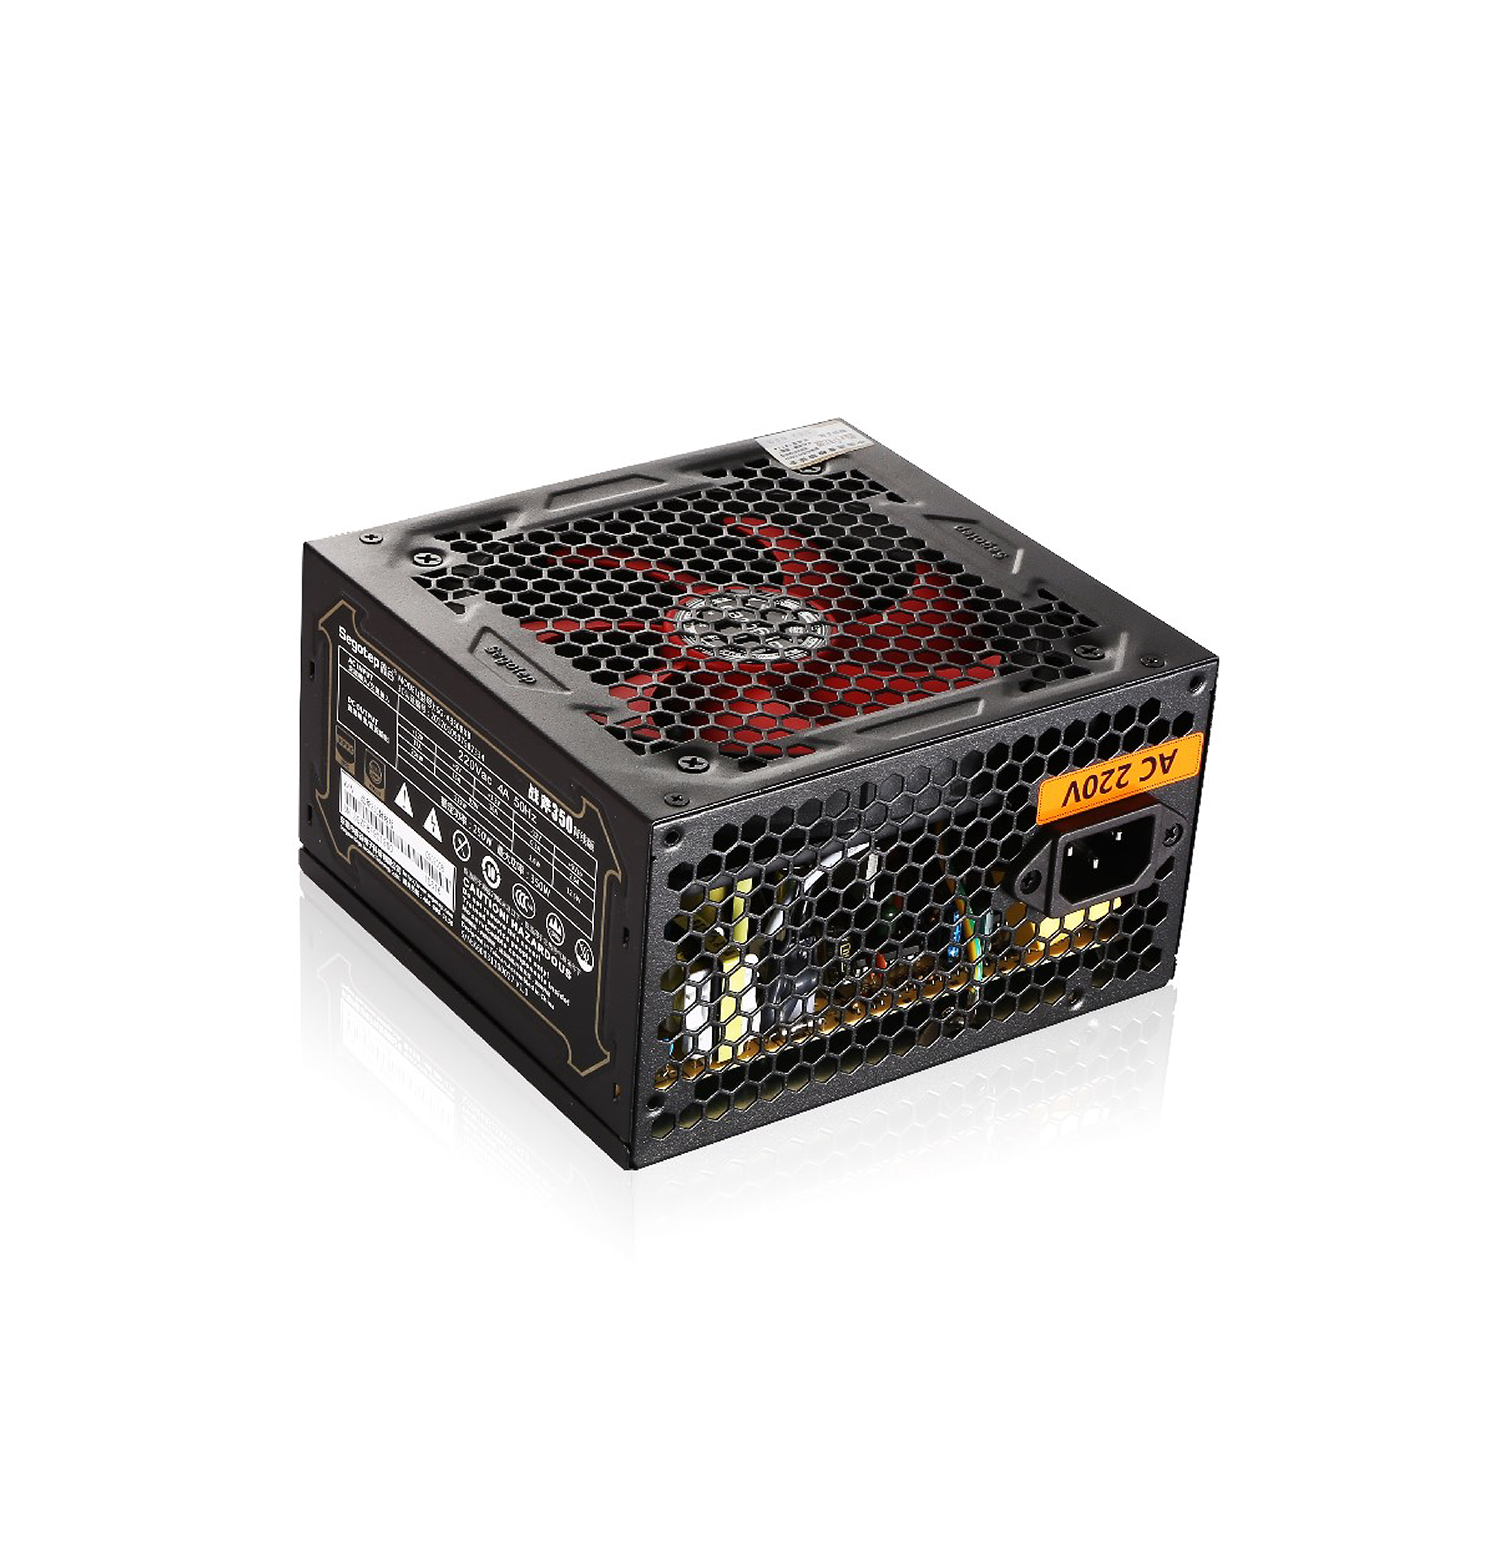 SEGOTEP ZF-350 PLUS Power Supply